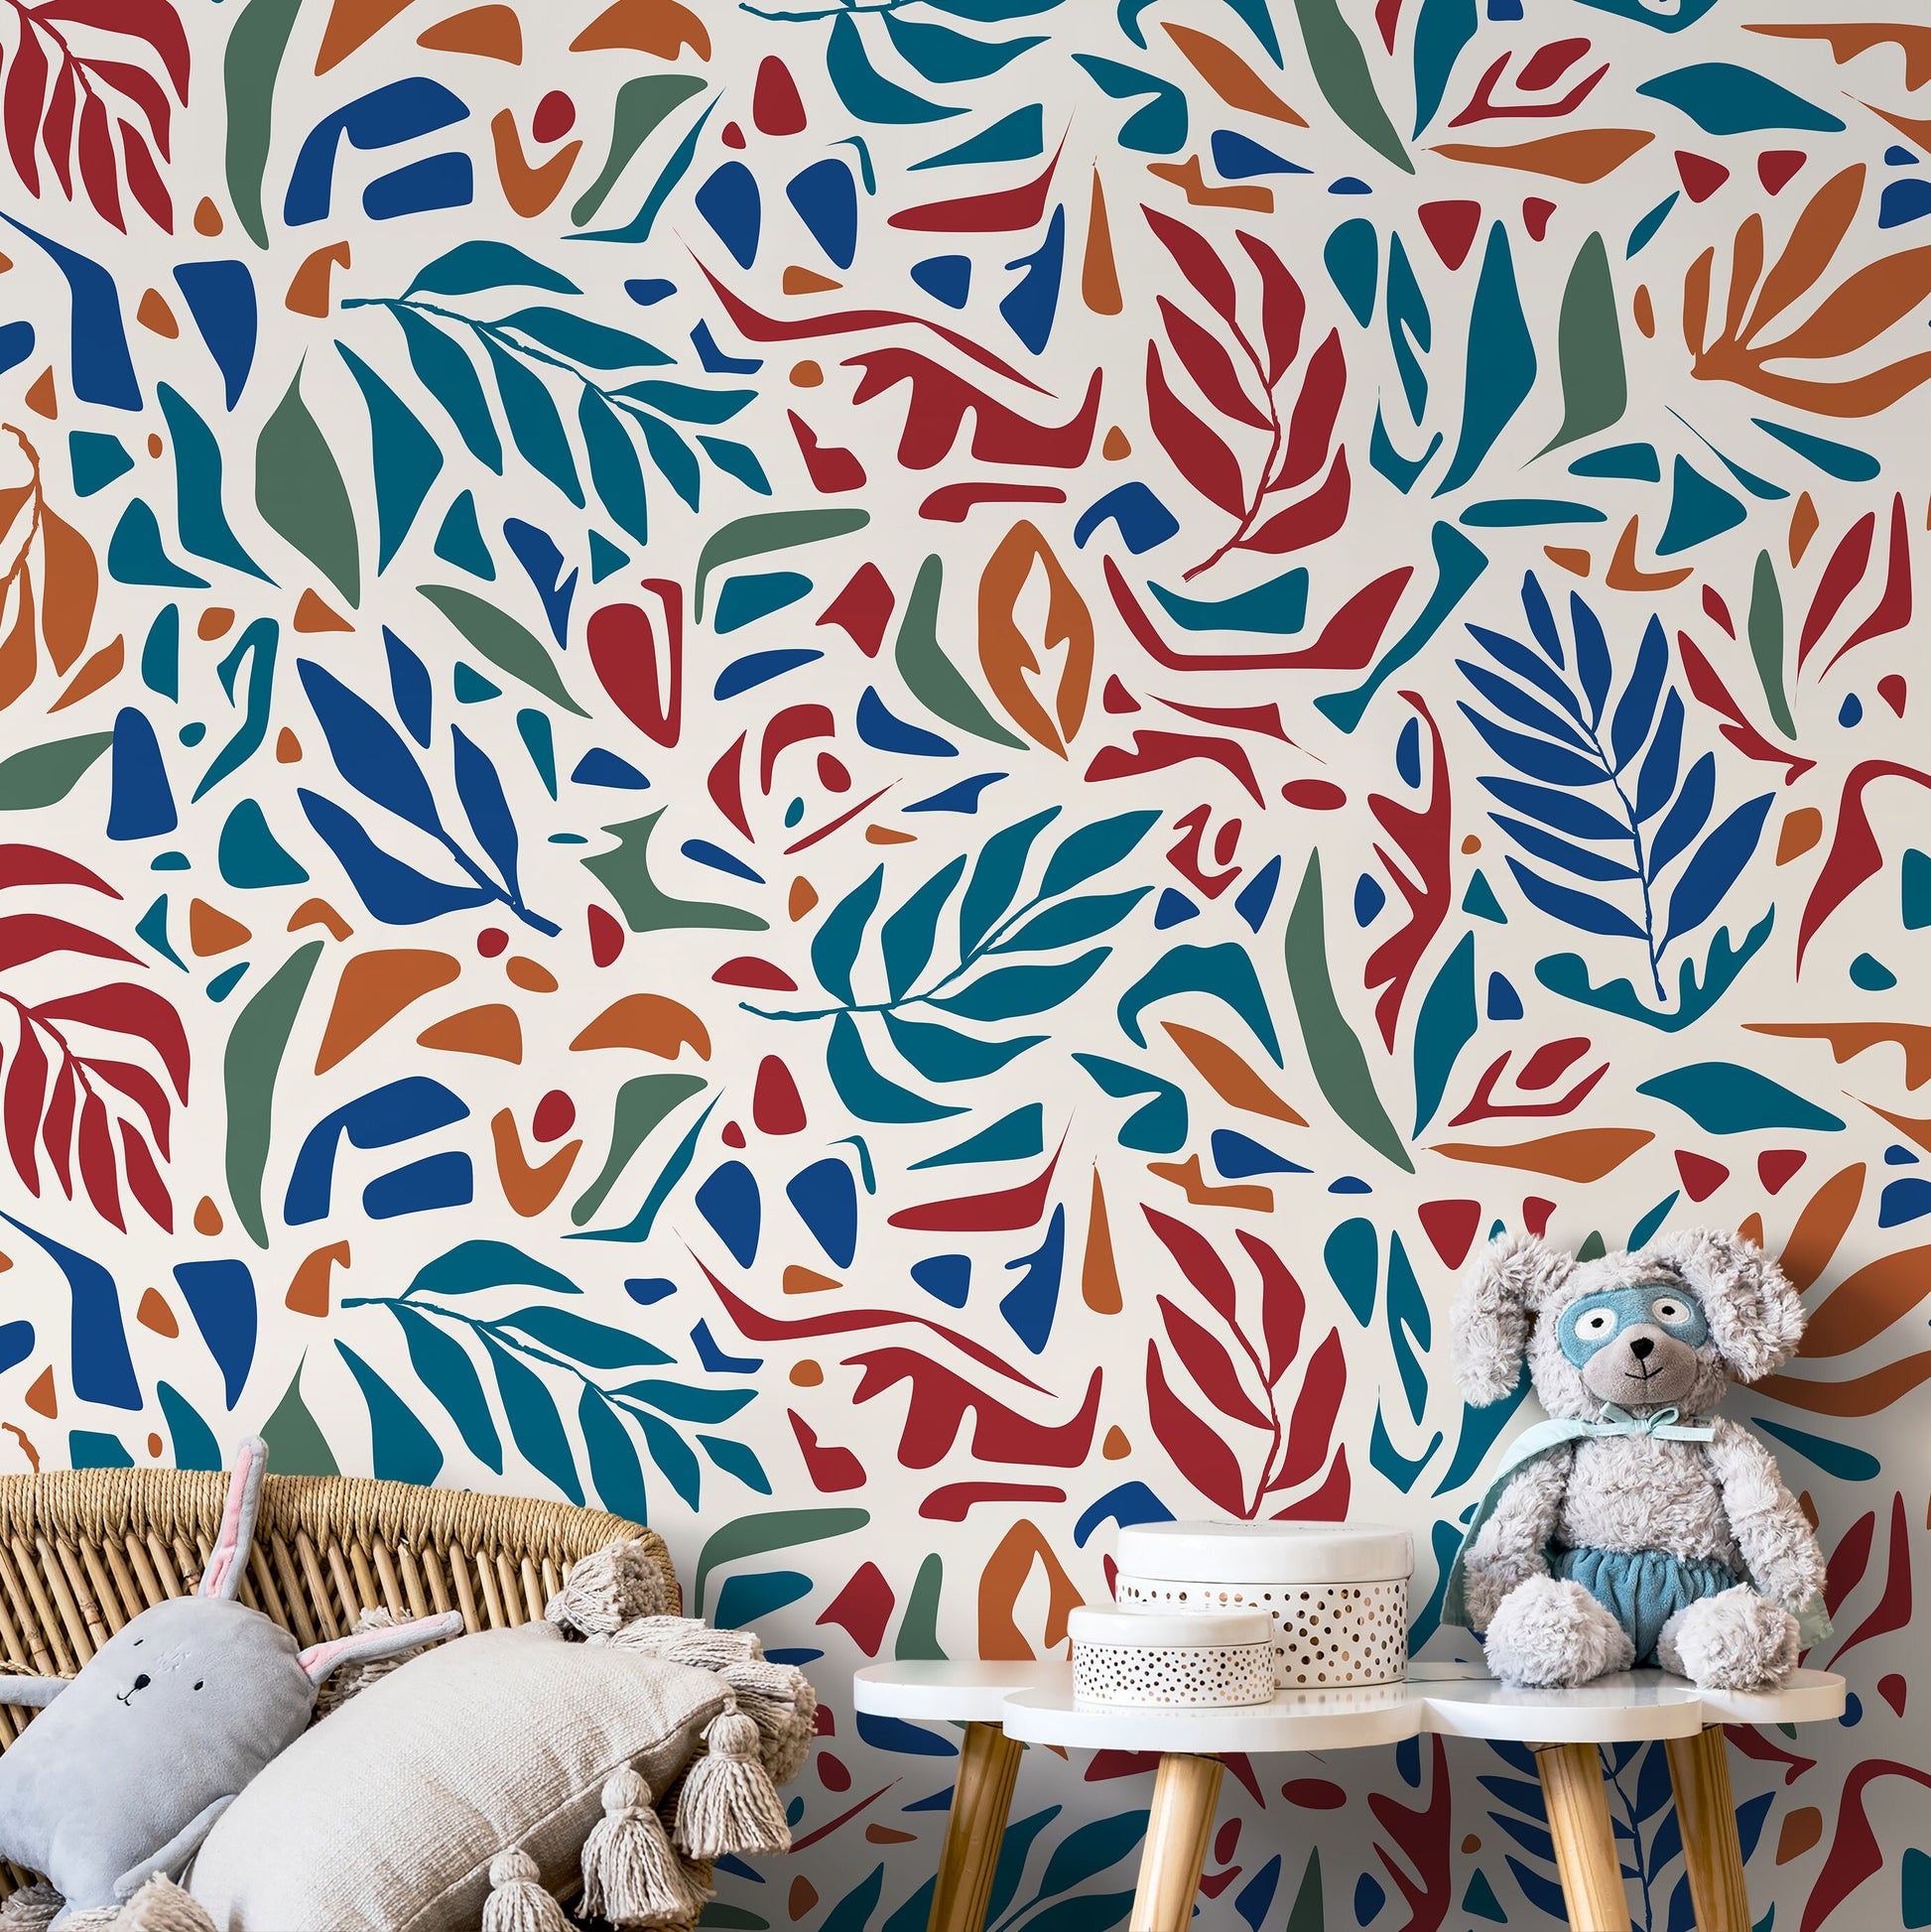 Colorful Abstract Leaf Wallpaper Modern Wallpaper Peel and Stick and Traditional Wallpaper - D721